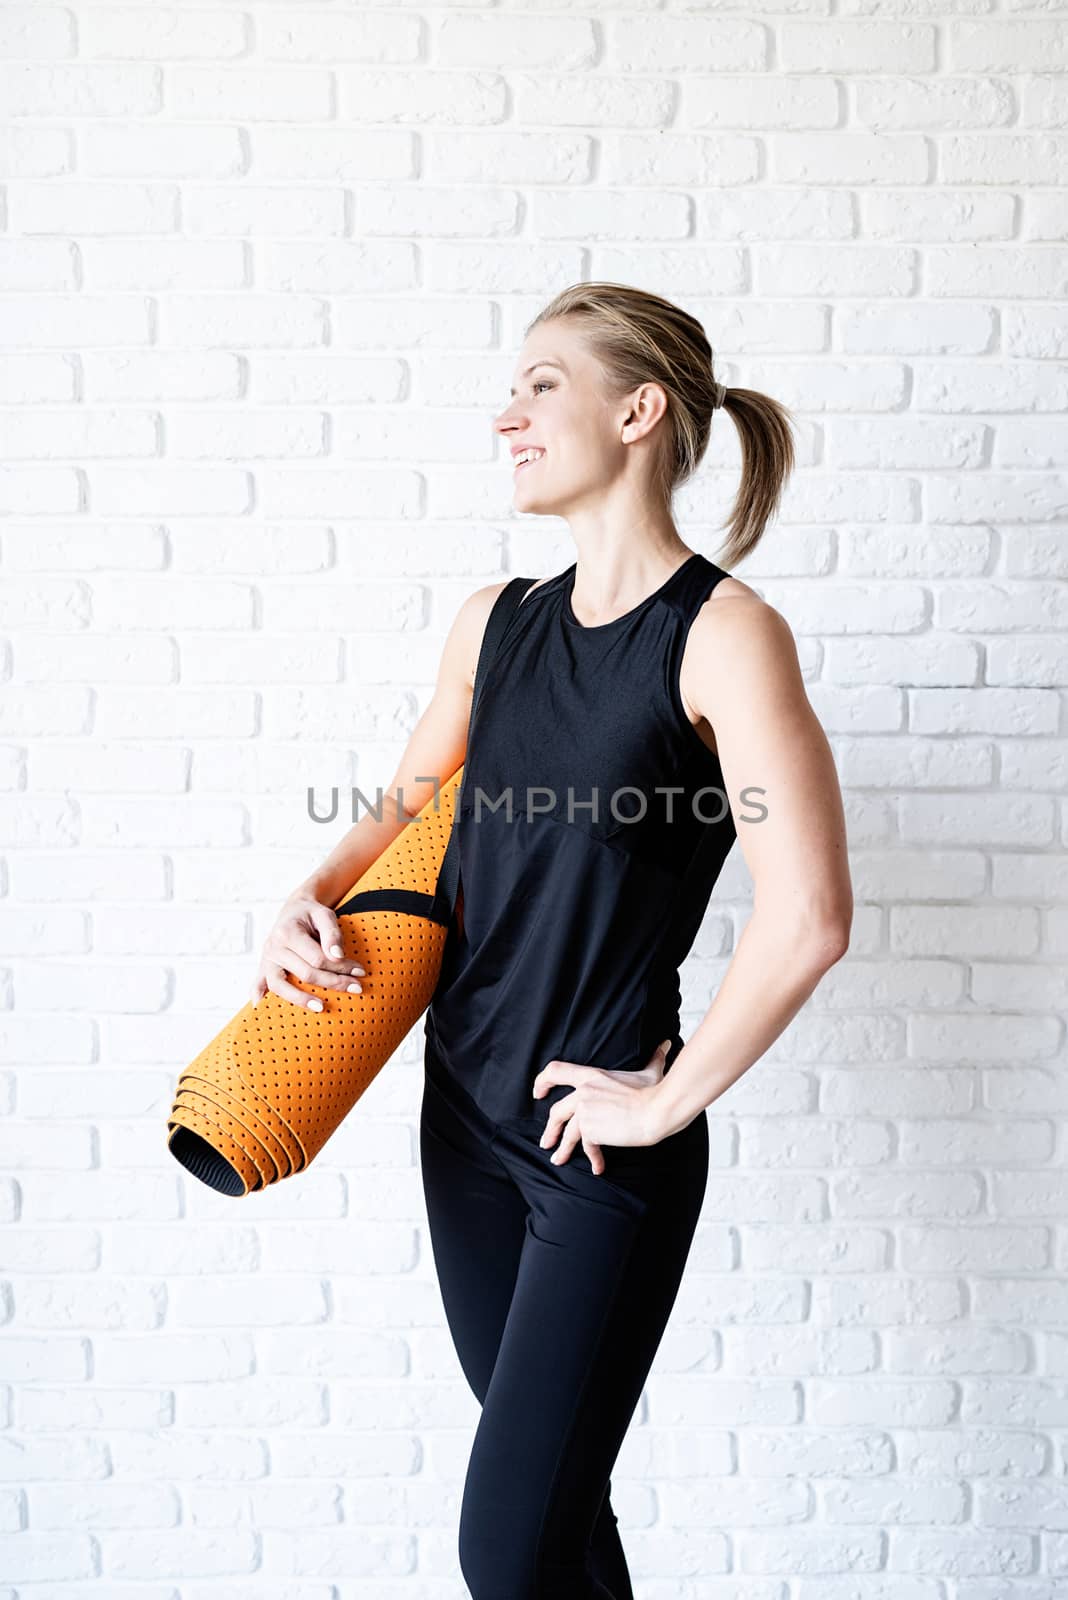 Smiling athletic woman in black sportwear on white brick wall background by Desperada